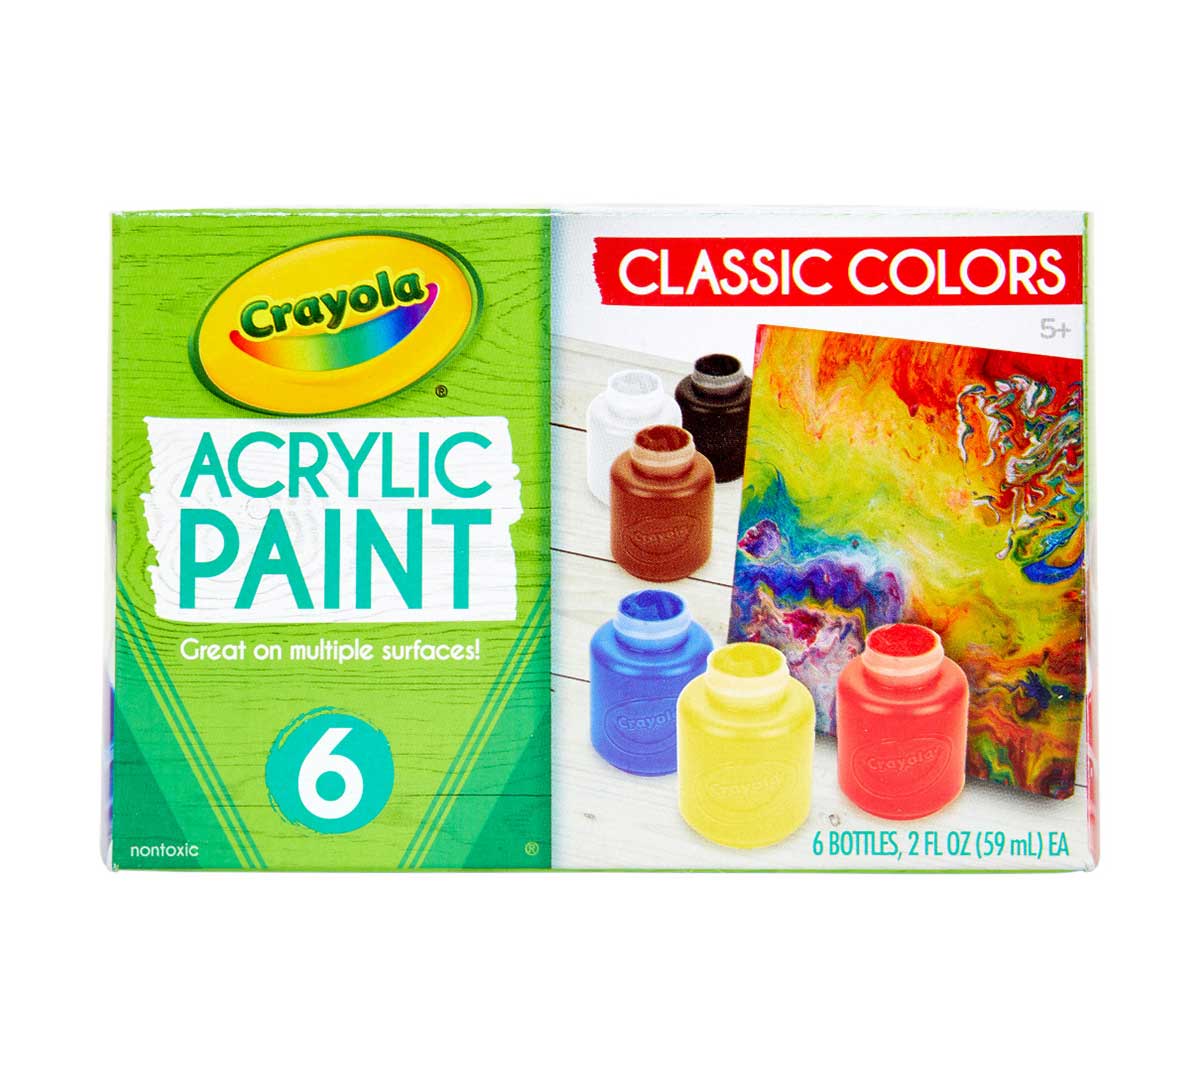 Non Toxic Acrylic Paint Set for Artist Canvas Painting - China Painting,  Acrylic Color